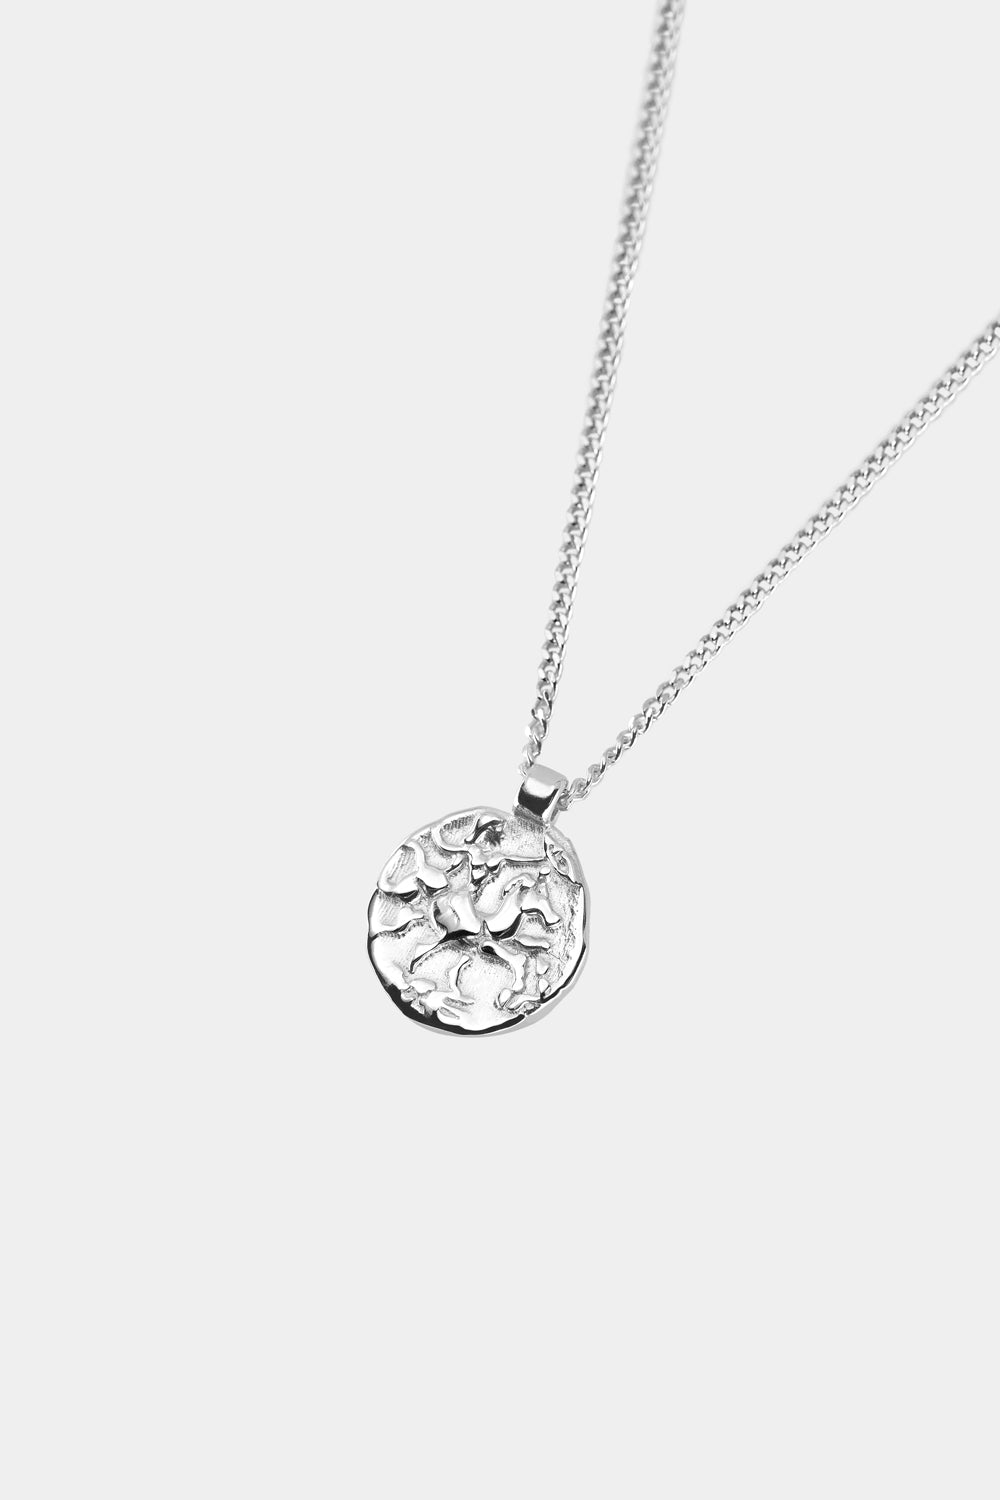 Mini Coin Necklace | Silver or 9K White Gold, More Options Available| Natasha Schweitzer